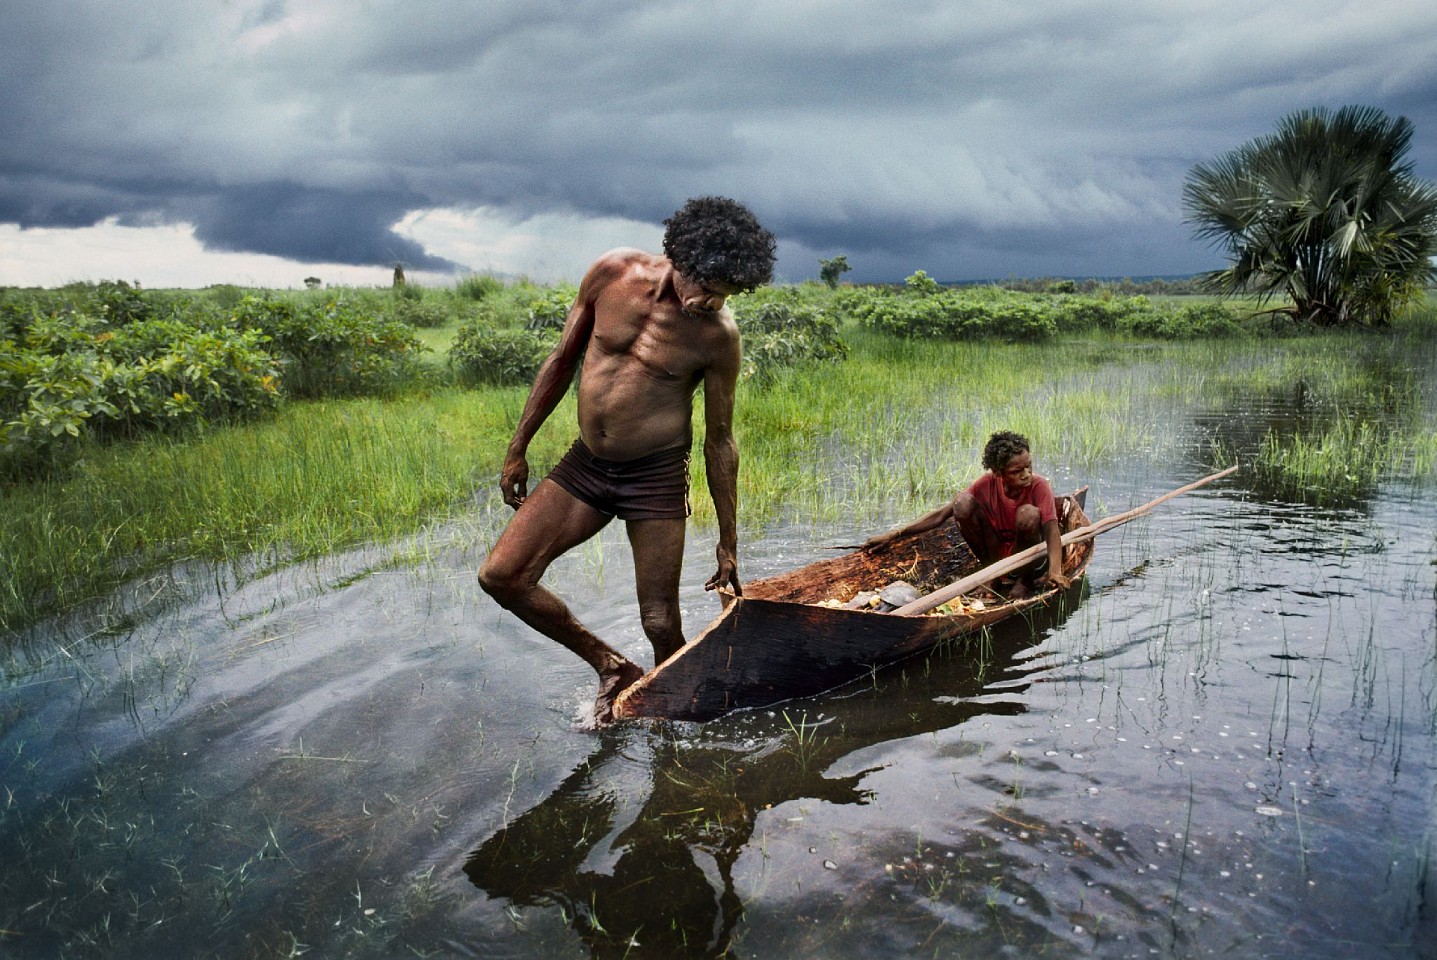 Steve McCurry, Father and Son Hunt, 1984
FujiFlex Crystal Archive Print
Price/Size on request